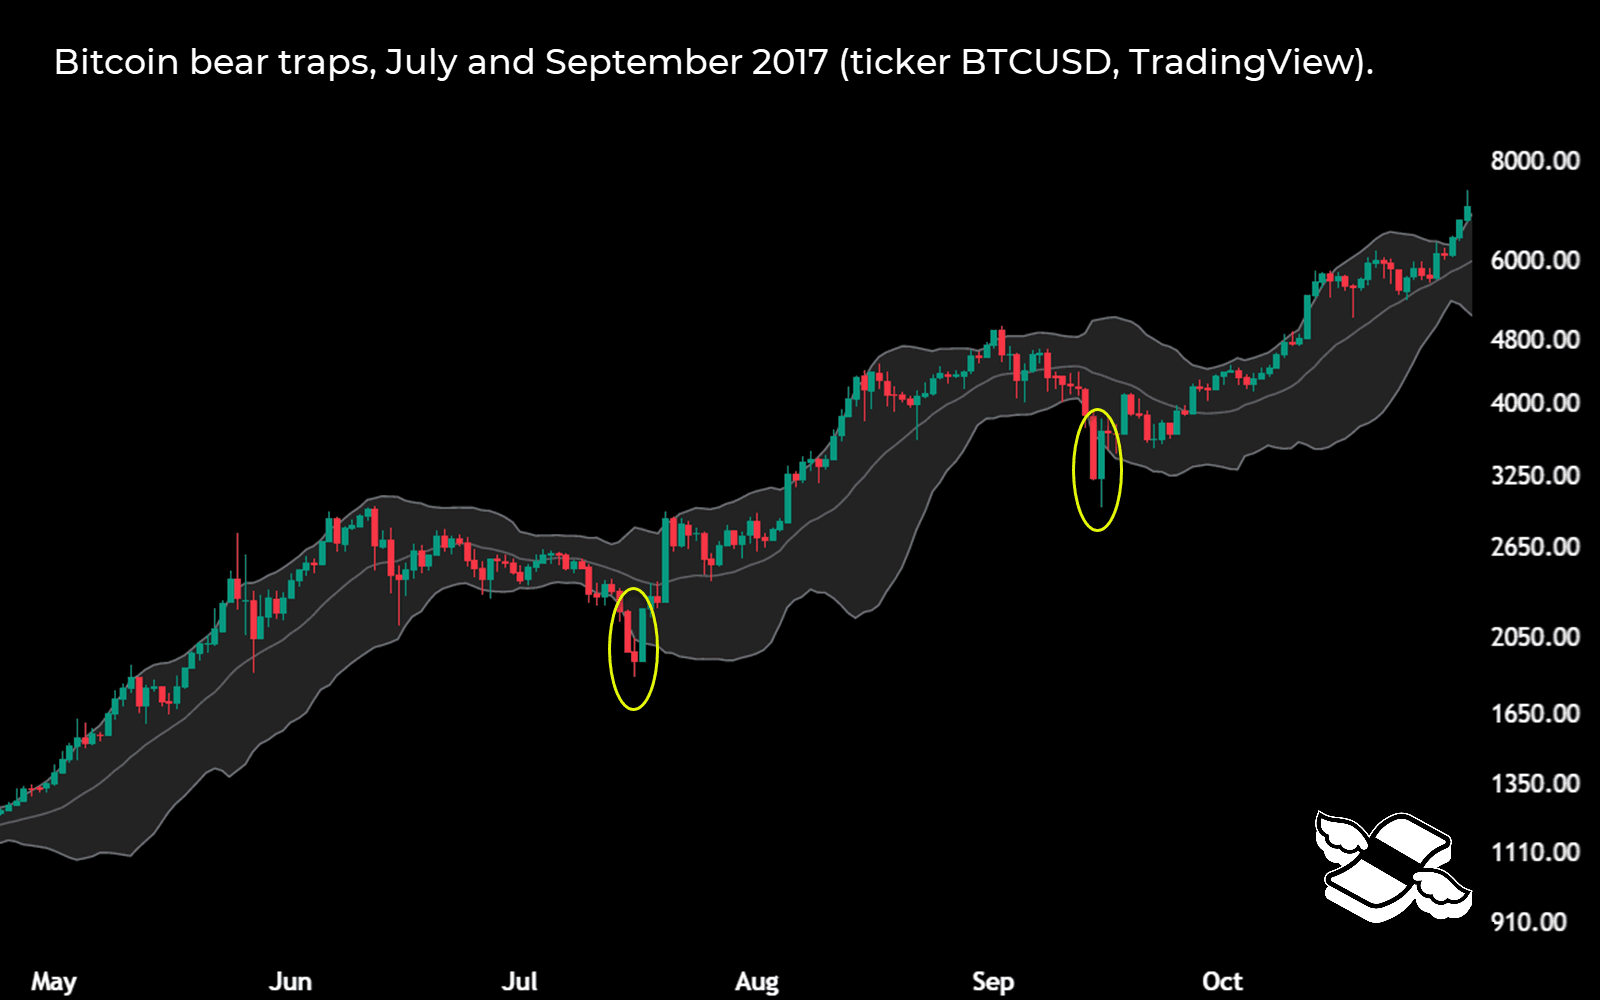 Chart drawn with TradingView.